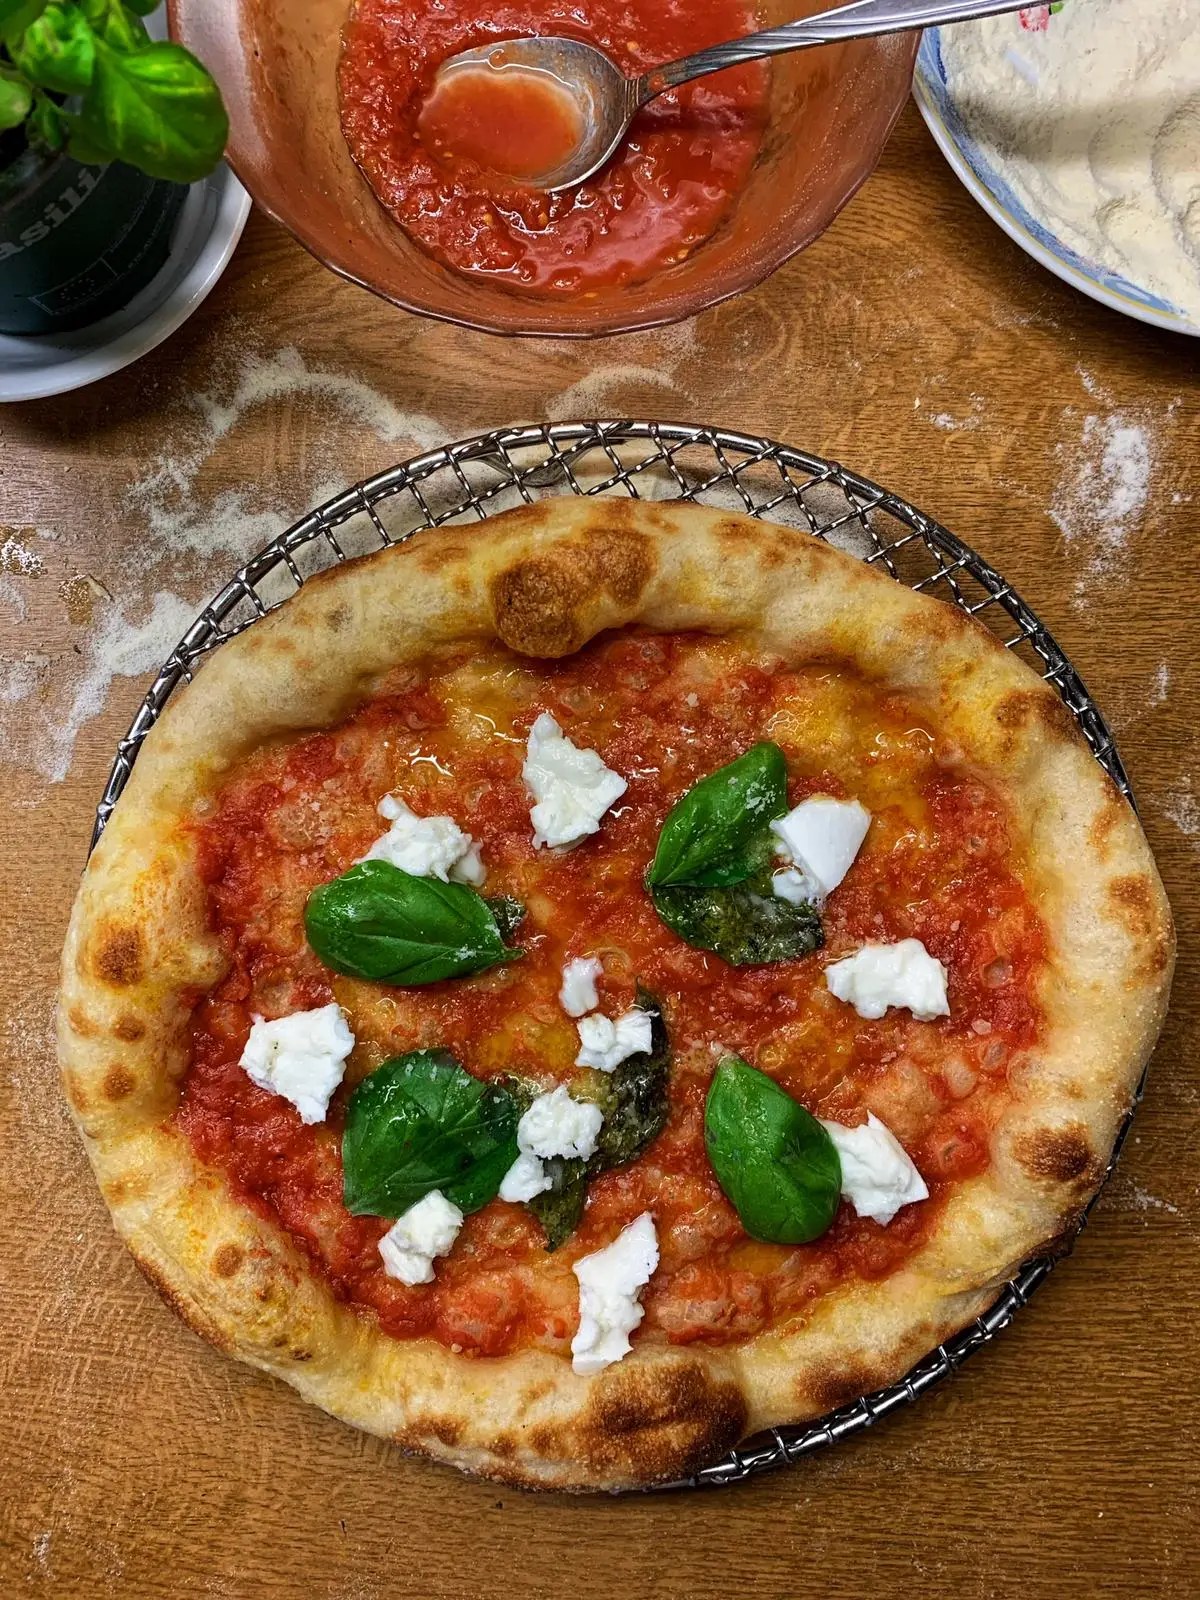 Neapolitan Pizza made in the household oven